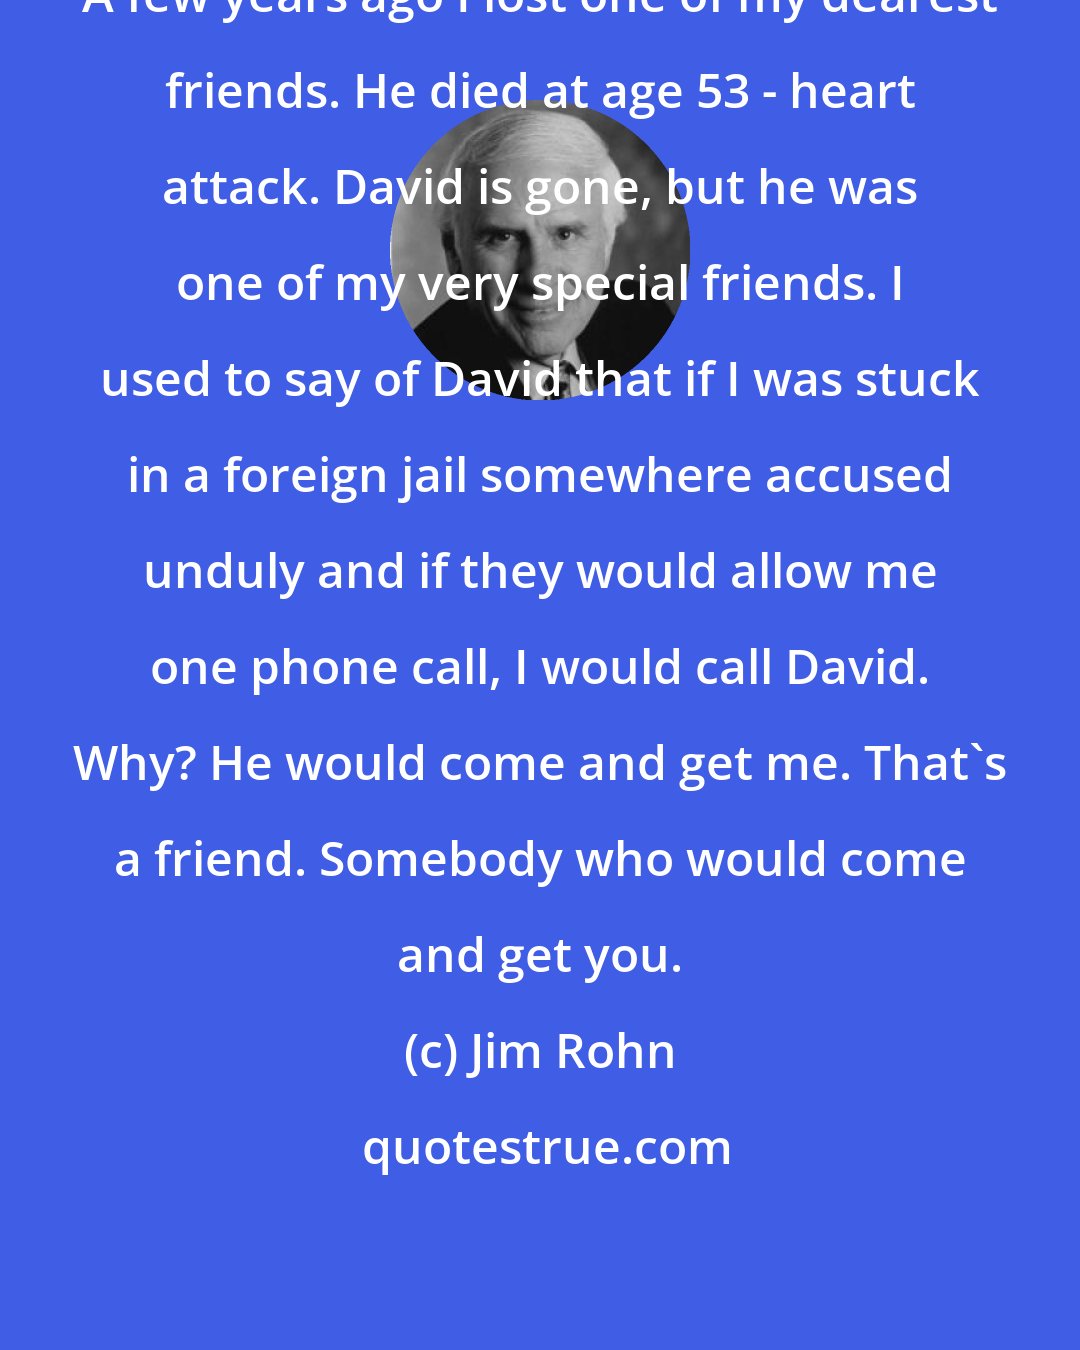 Jim Rohn: A few years ago I lost one of my dearest friends. He died at age 53 - heart attack. David is gone, but he was one of my very special friends. I used to say of David that if I was stuck in a foreign jail somewhere accused unduly and if they would allow me one phone call, I would call David. Why? He would come and get me. That's a friend. Somebody who would come and get you.